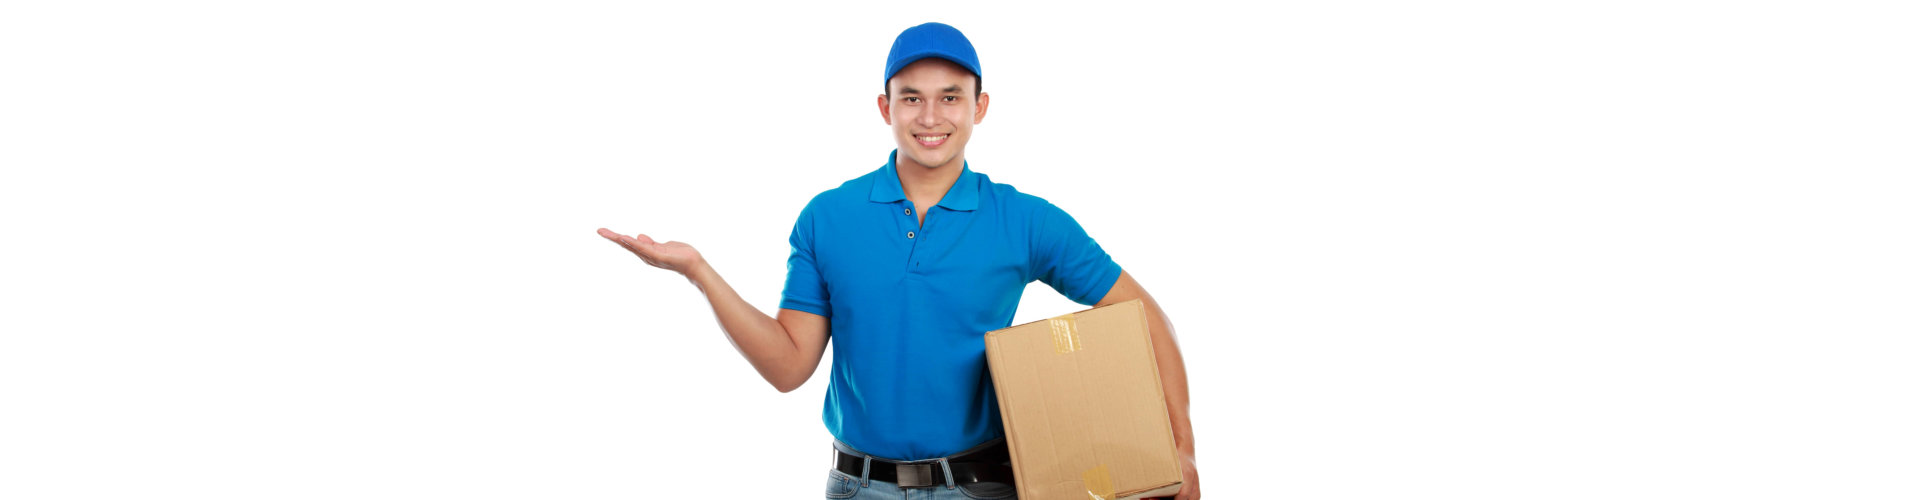 delivery man holding a package